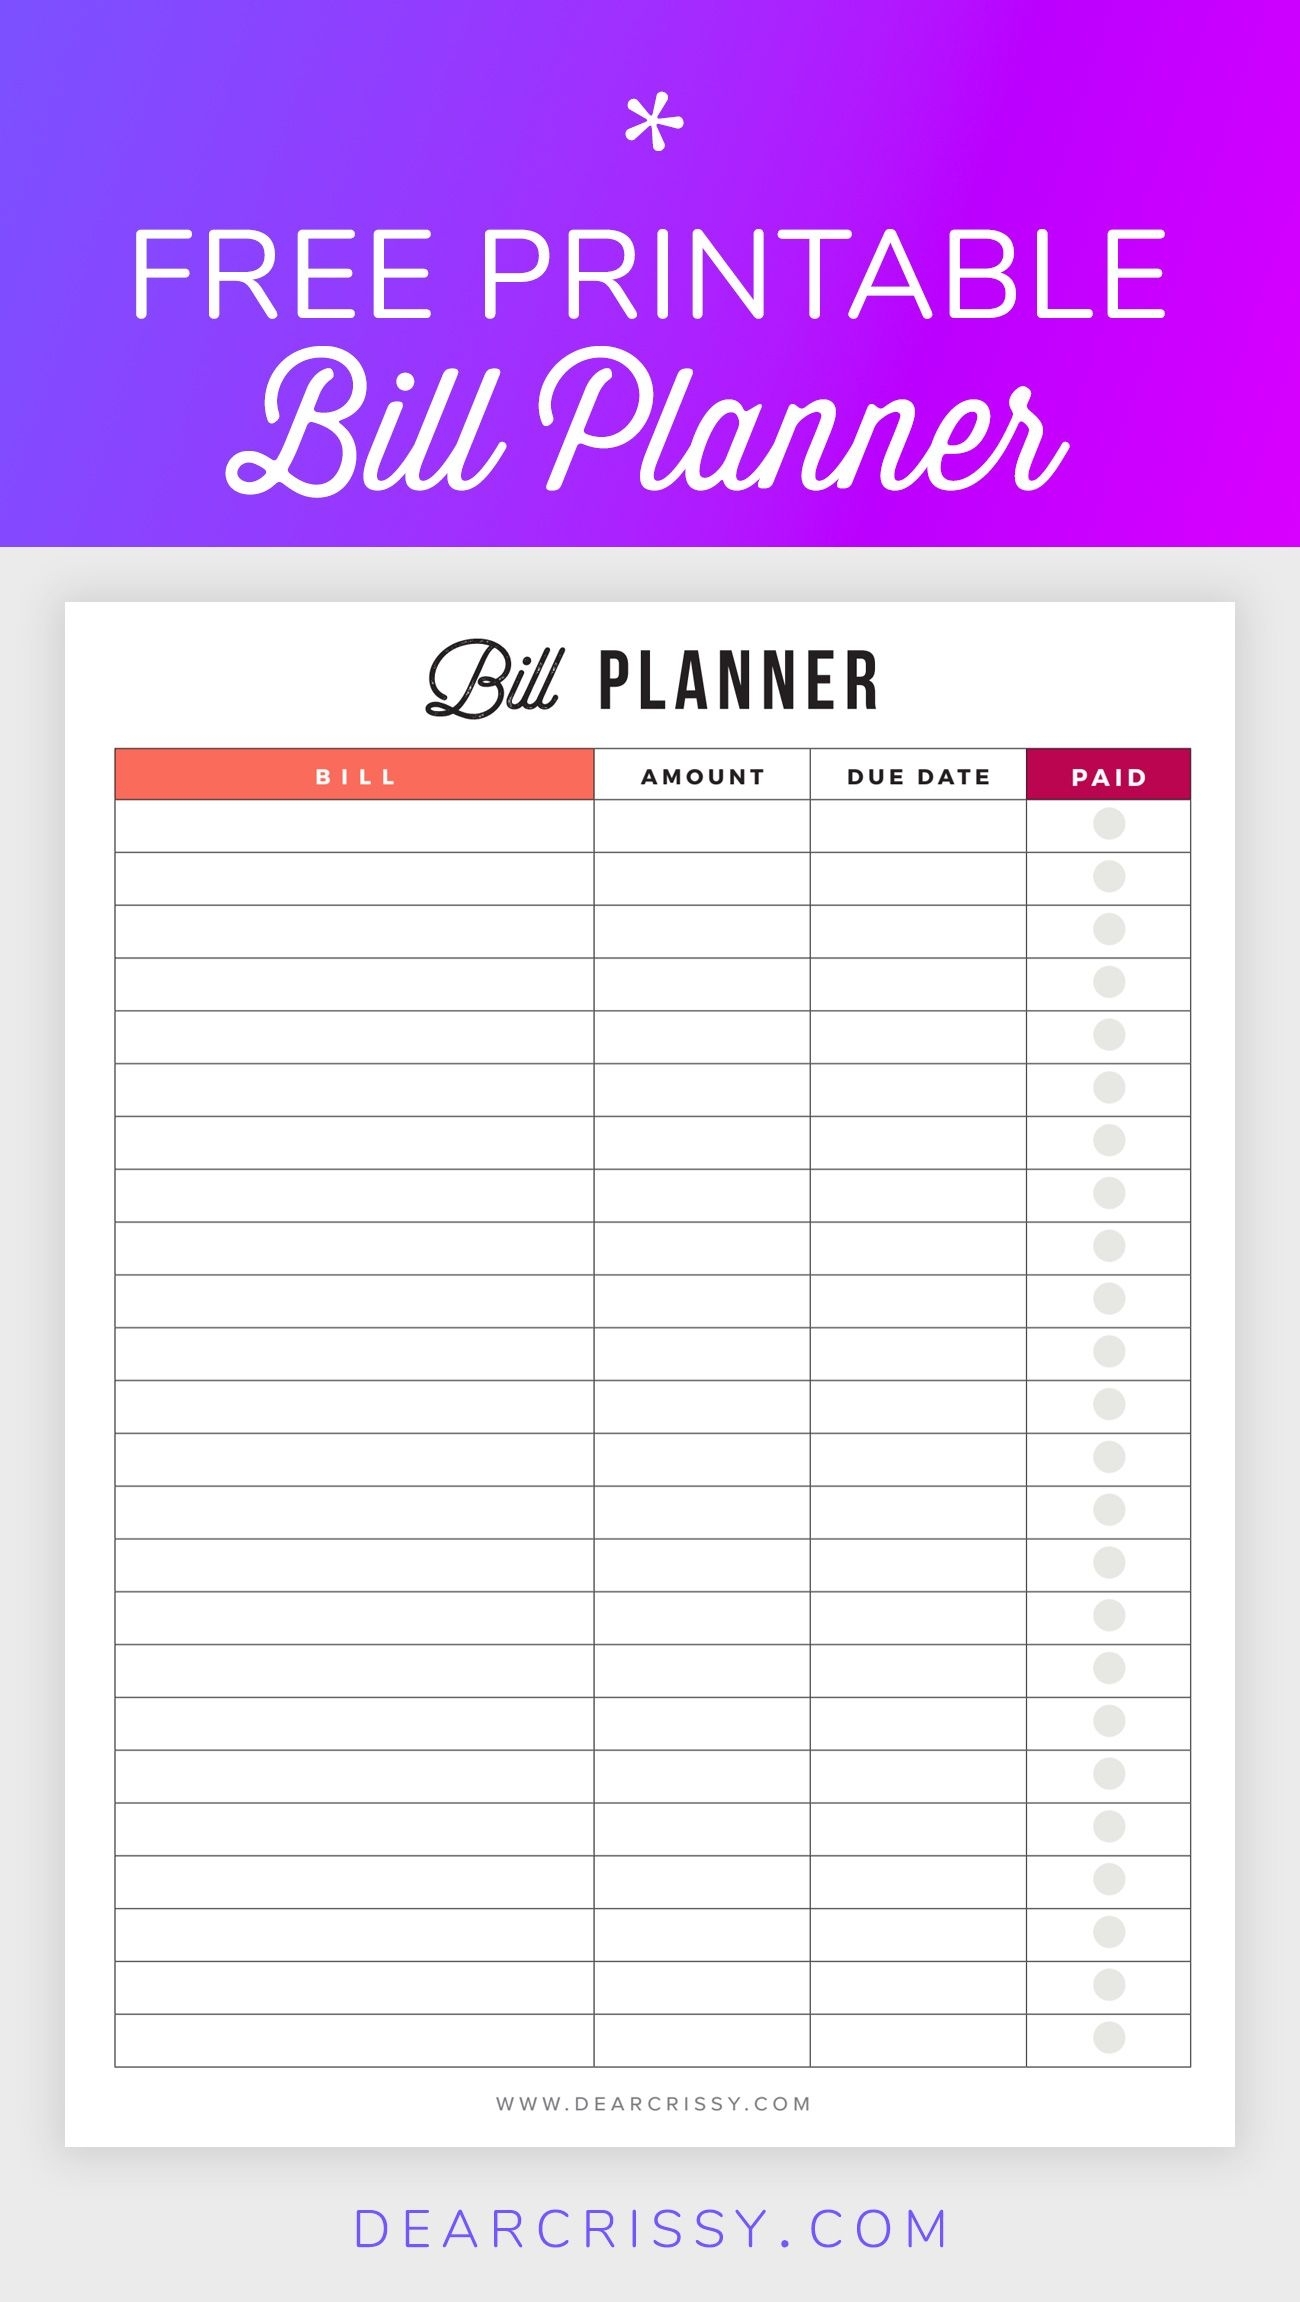 Bill Planner Printable - Pay Down Your Bills This Year! | Organizing with regard to Printable Bill Payment Month Year